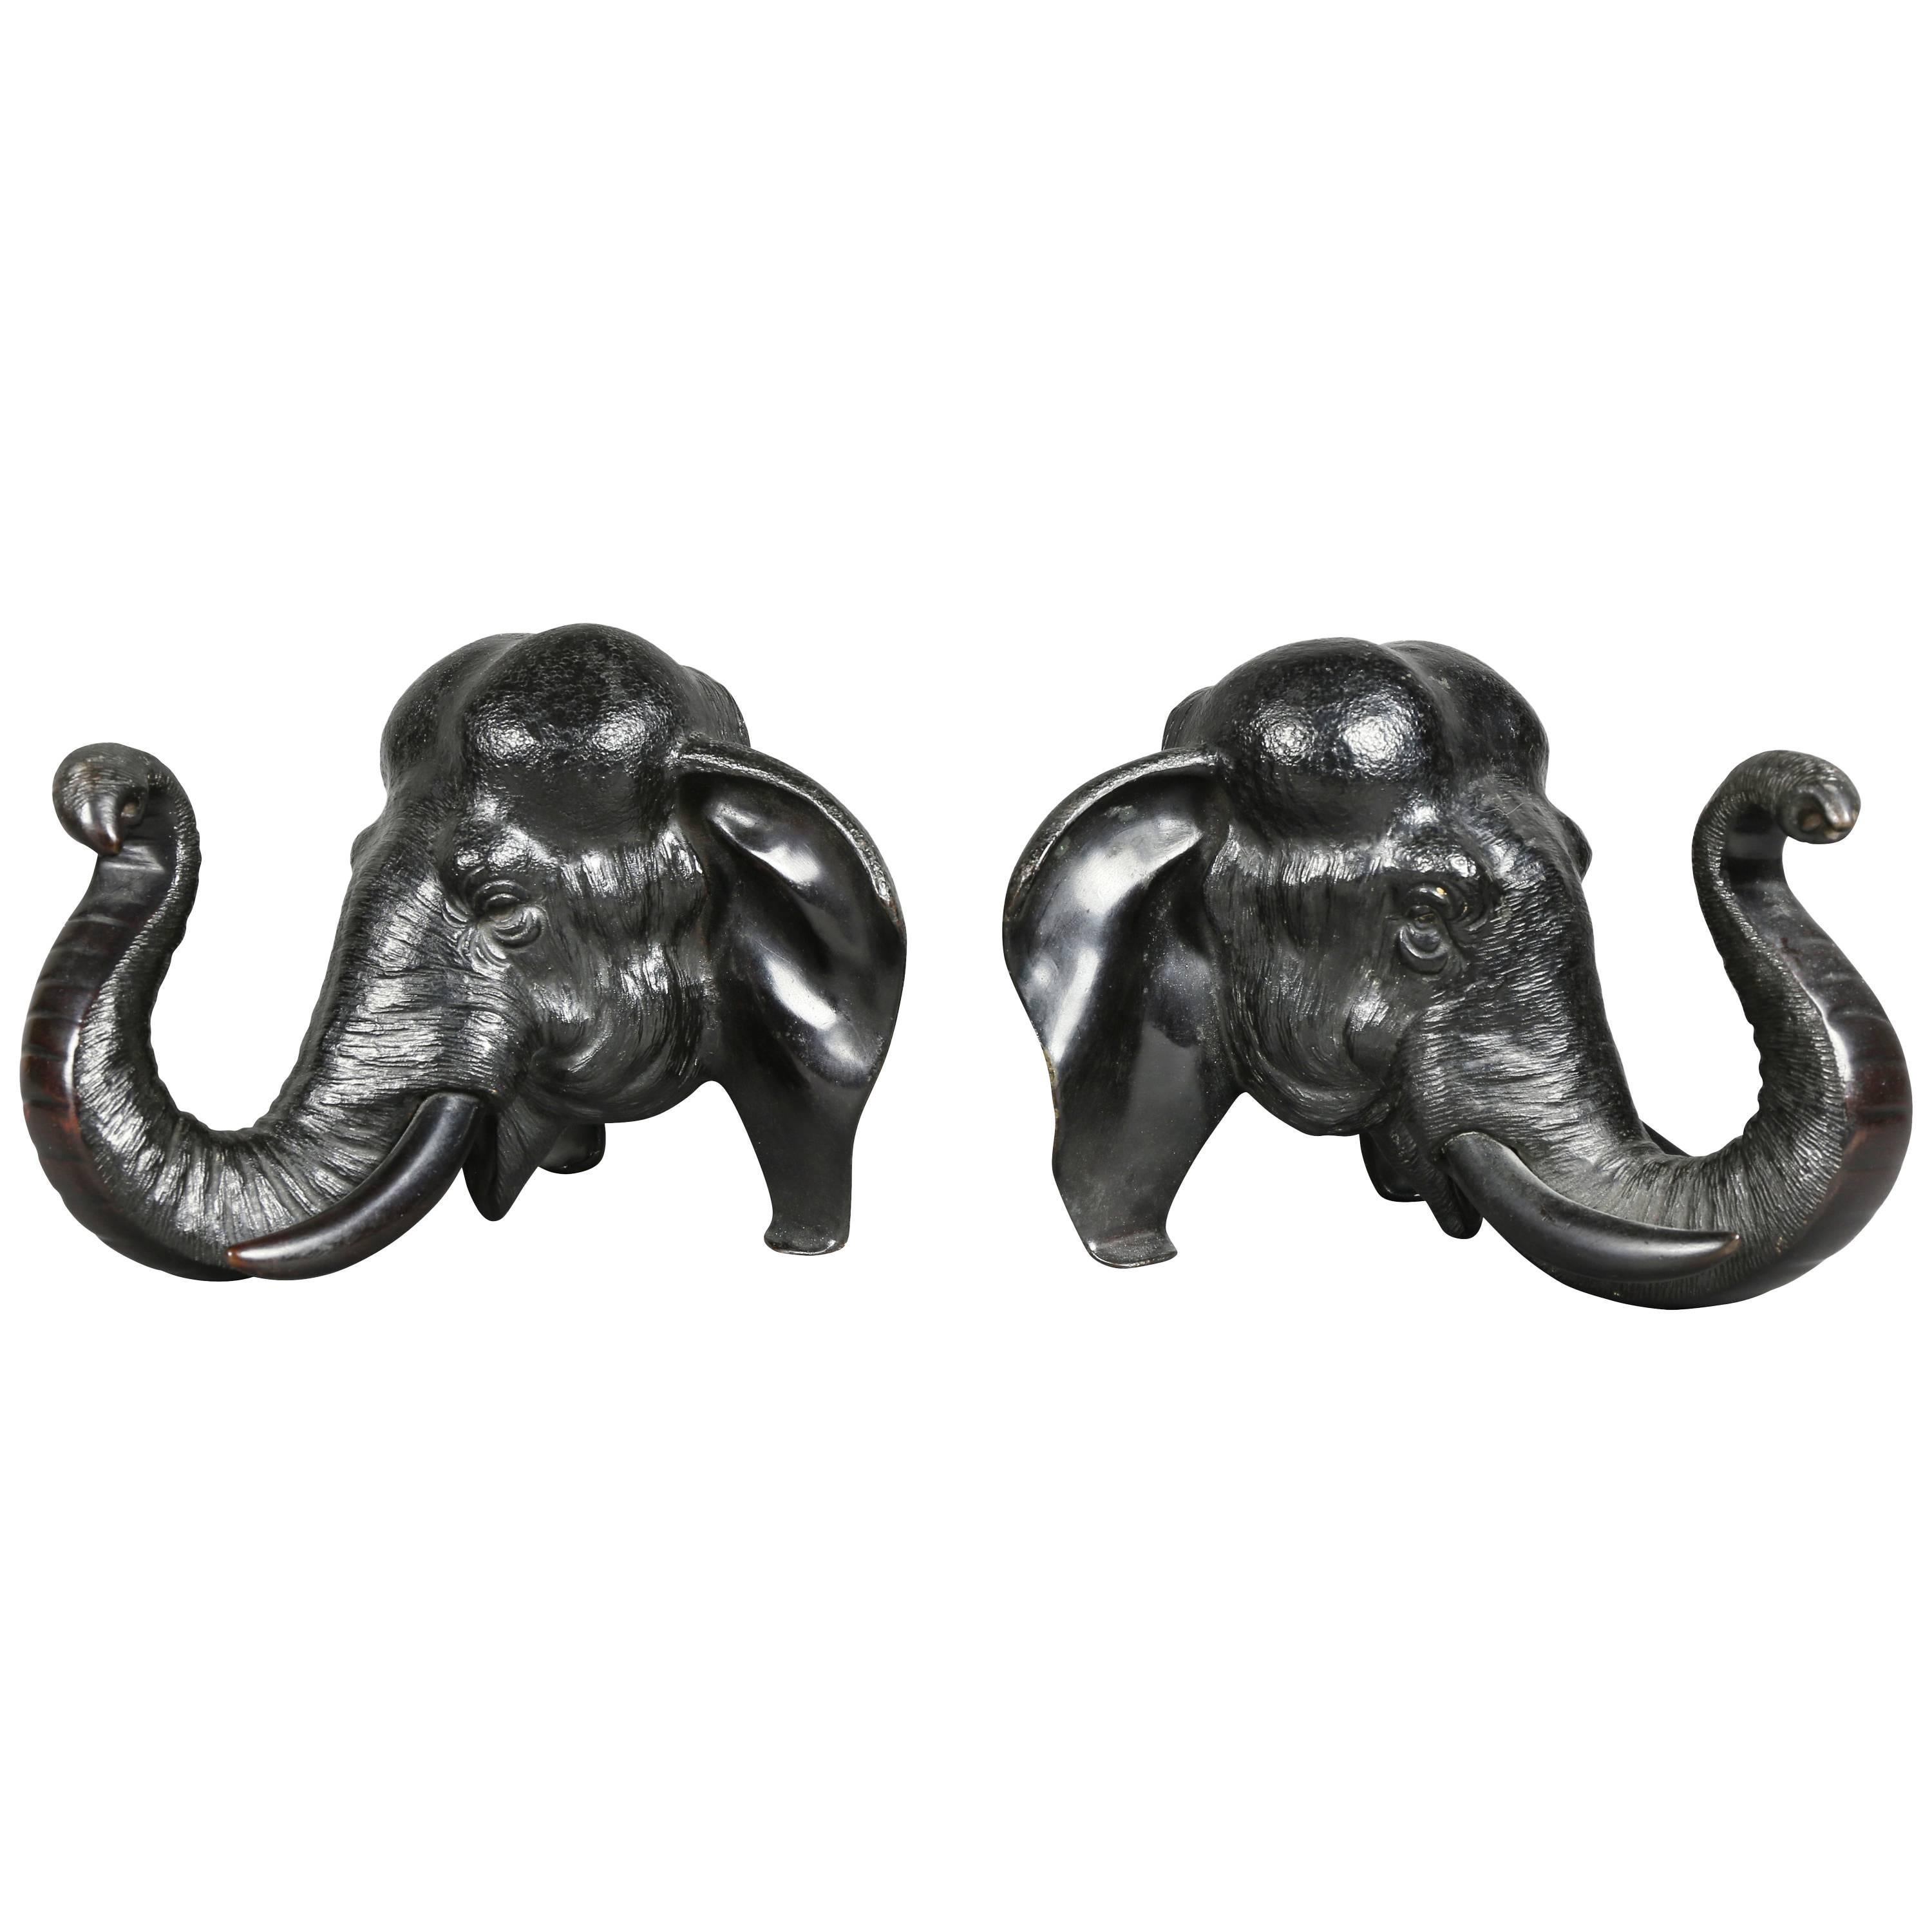 Pair of Japanese Bronze Elephant Form Bookends